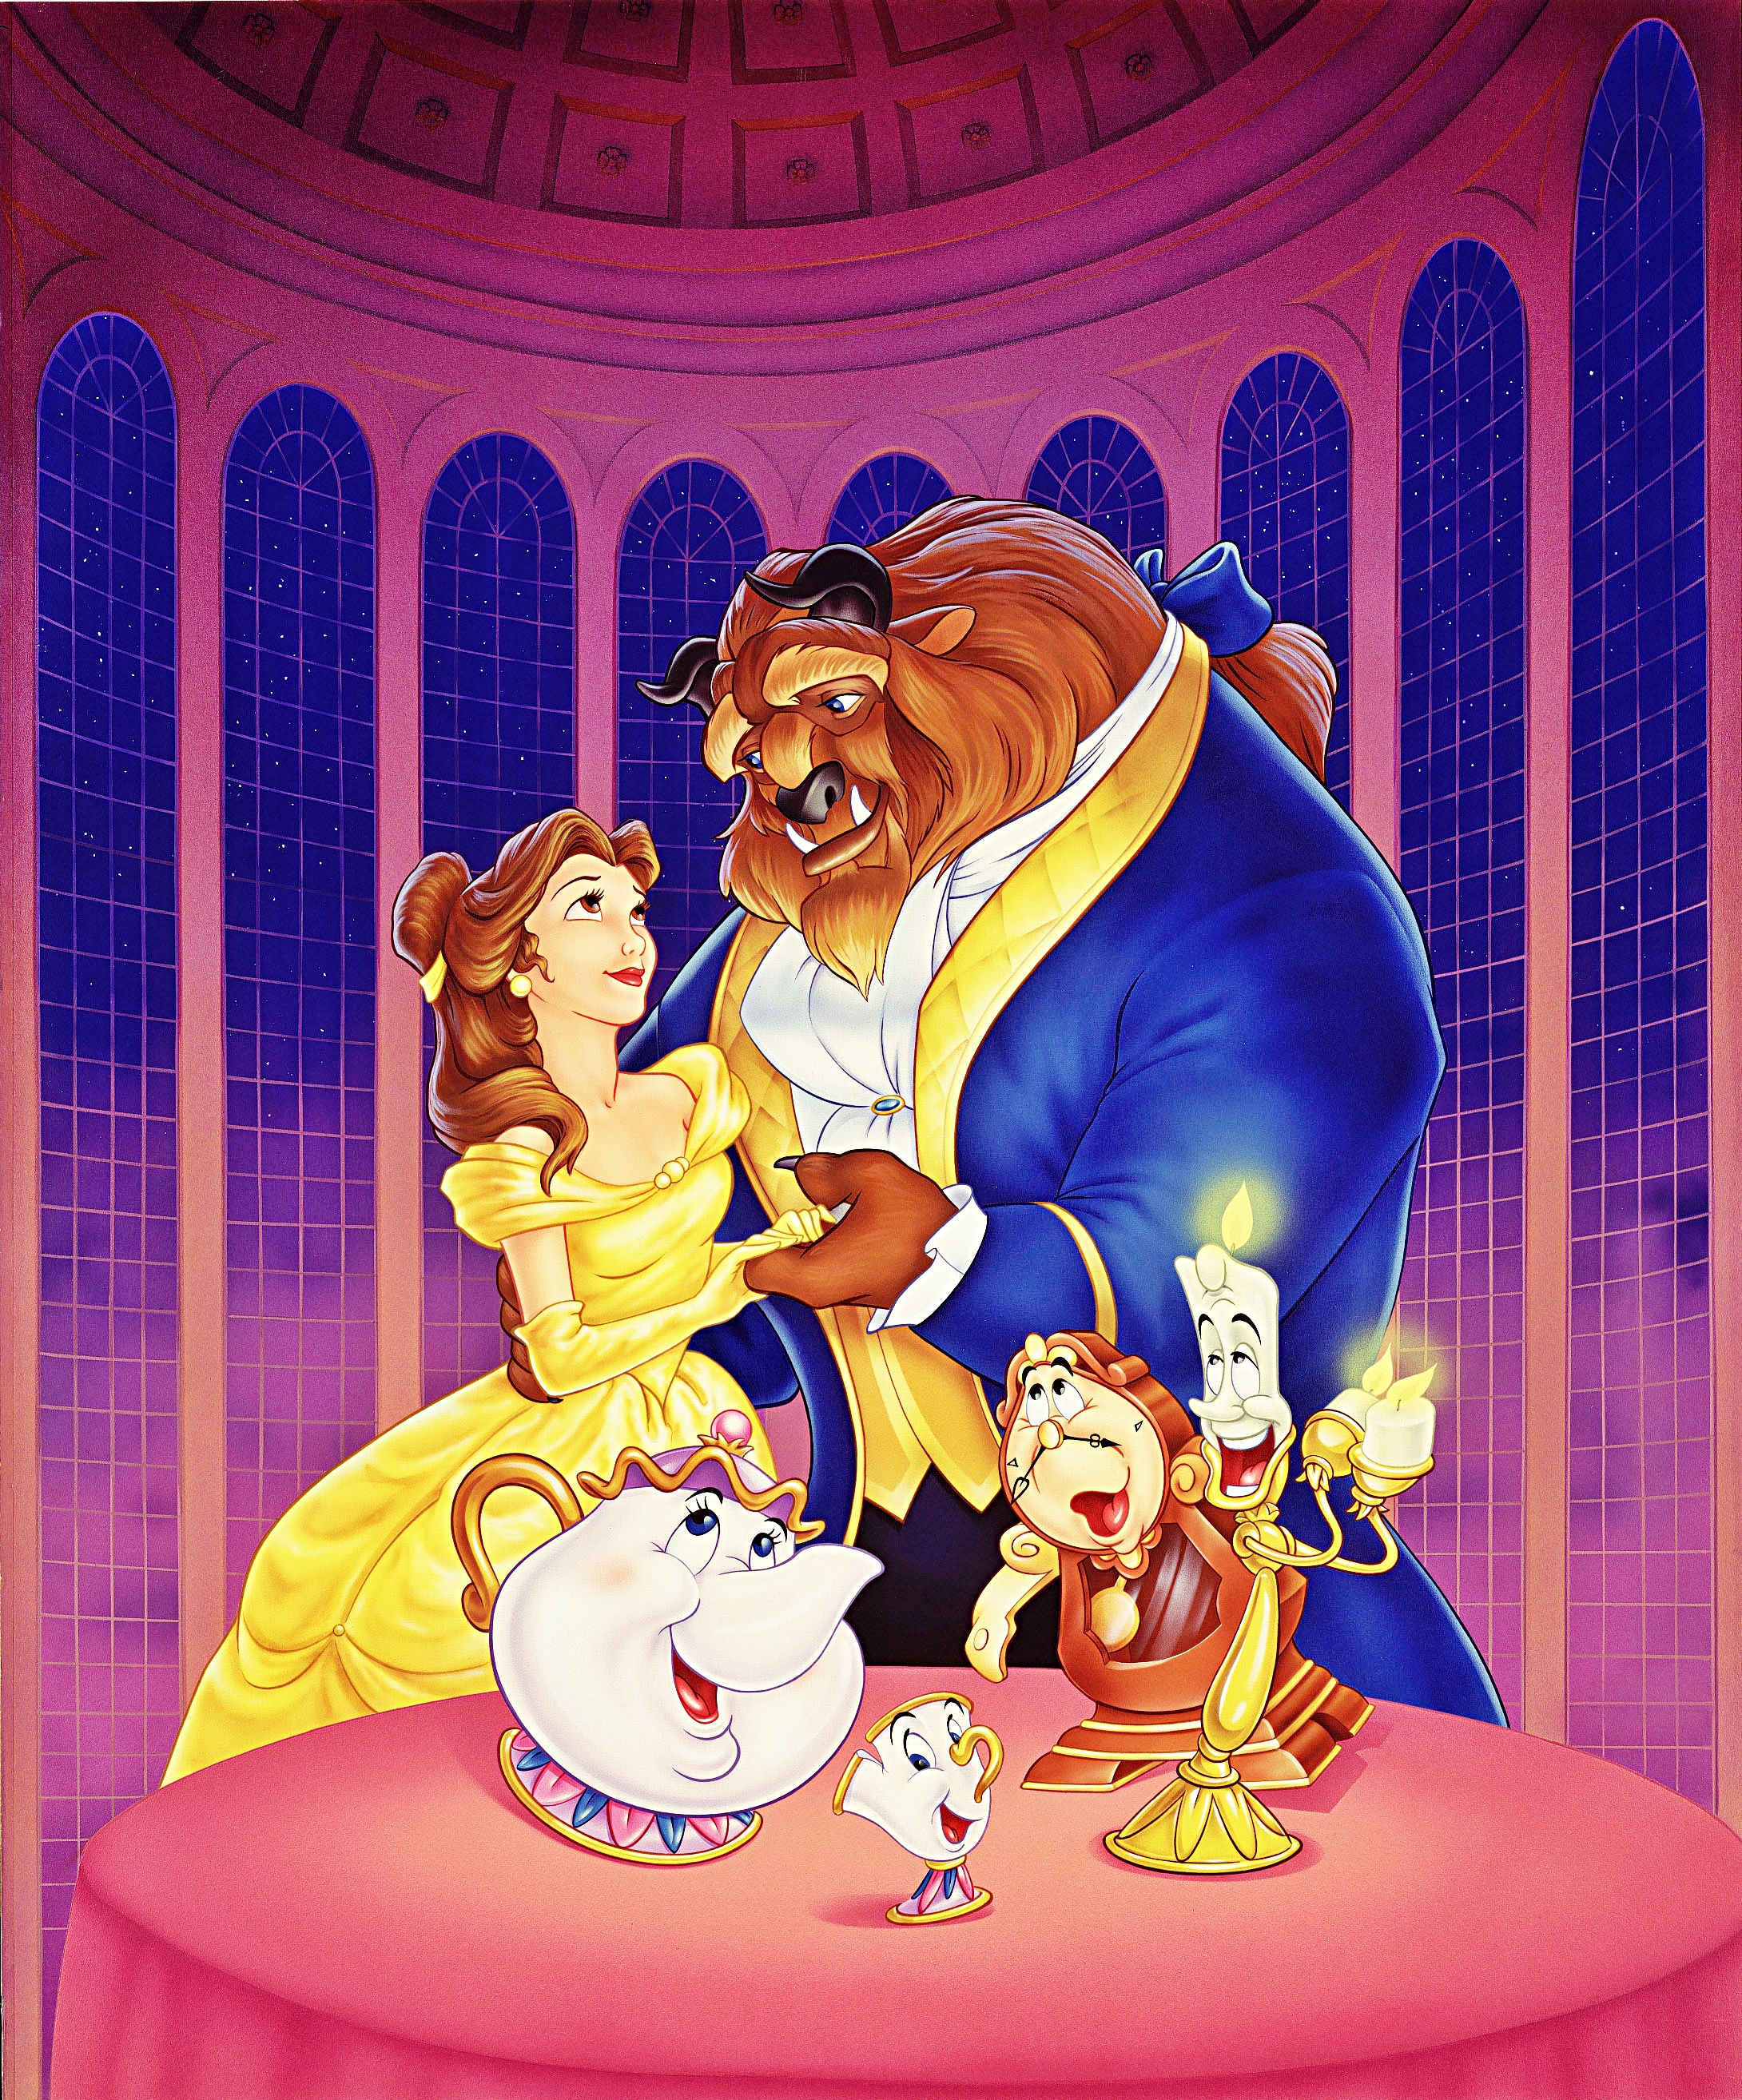 Beauty and the Beast (1991) review | The Anomalous Host